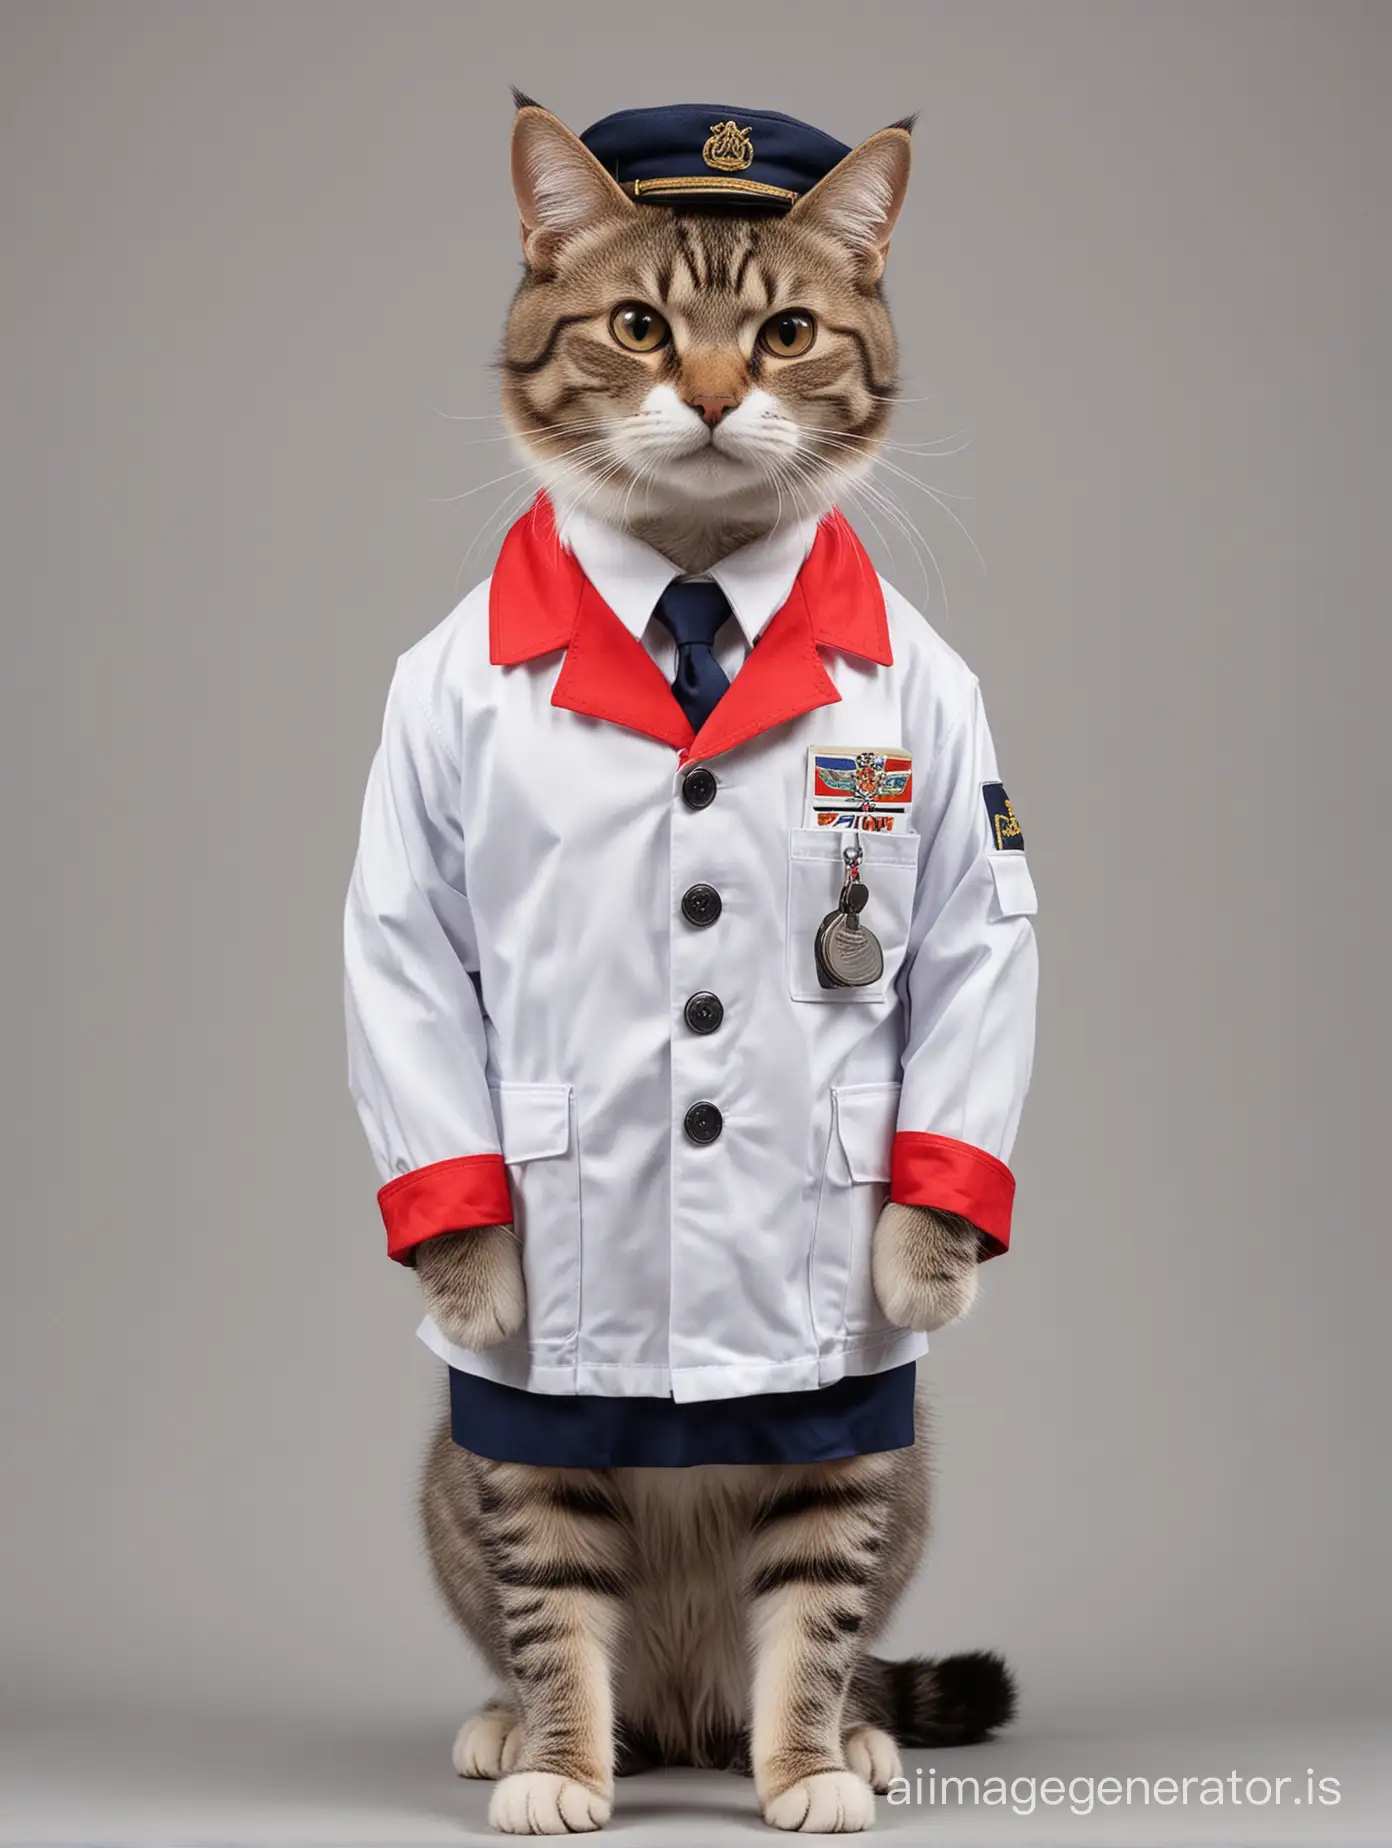 Professional-Postman-Cat-Delivering-Mail-in-Authentic-Uniform